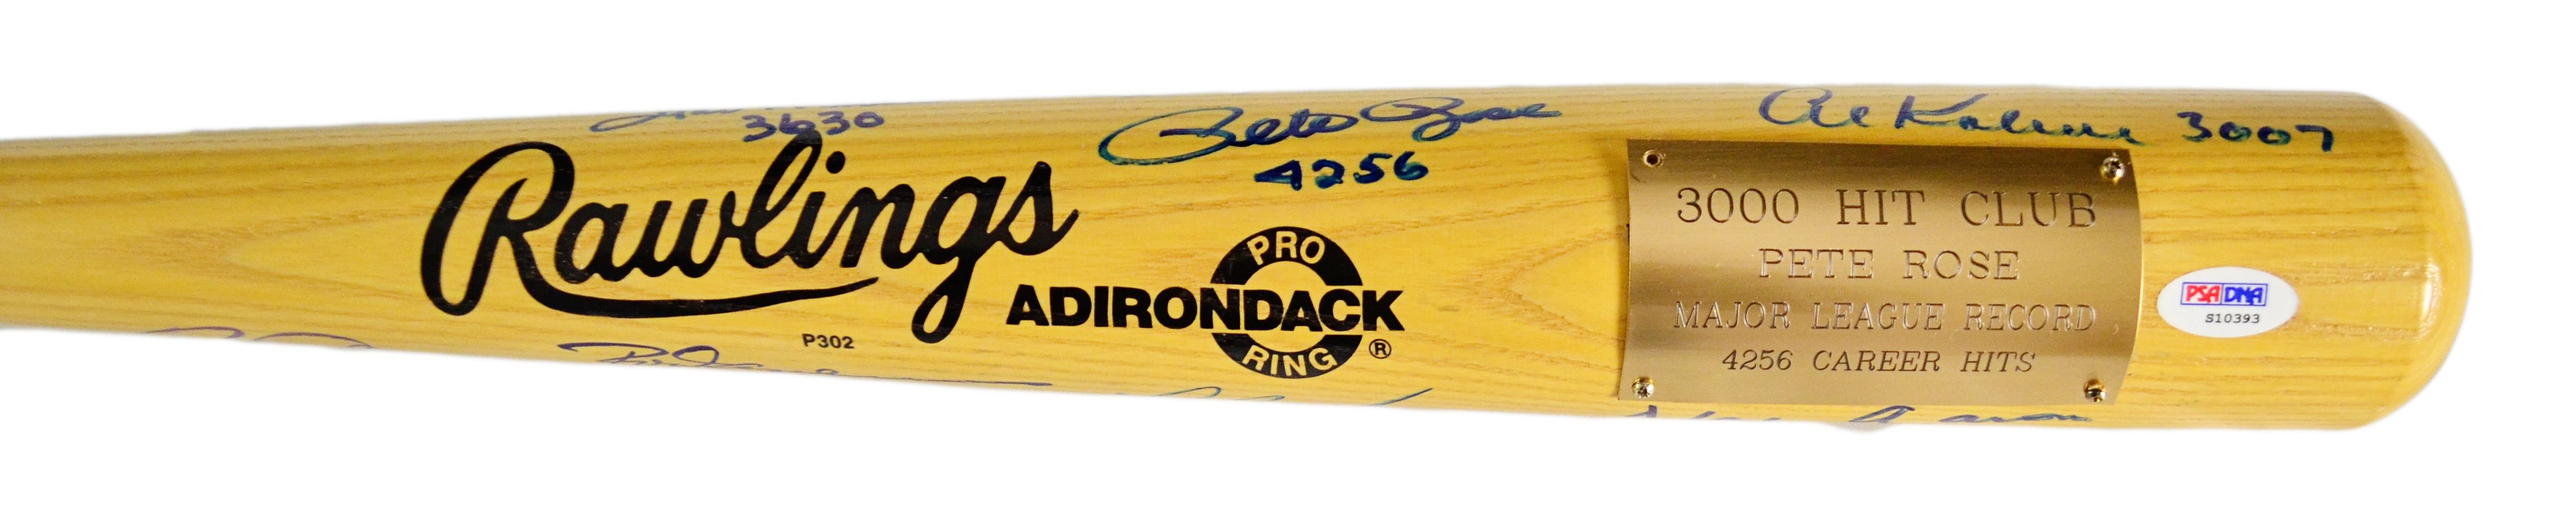 Lot Detail - 3000 Hit Club Signed and Inscribed Bat (19 signatures) Musial, Ripken ...4587 x 906